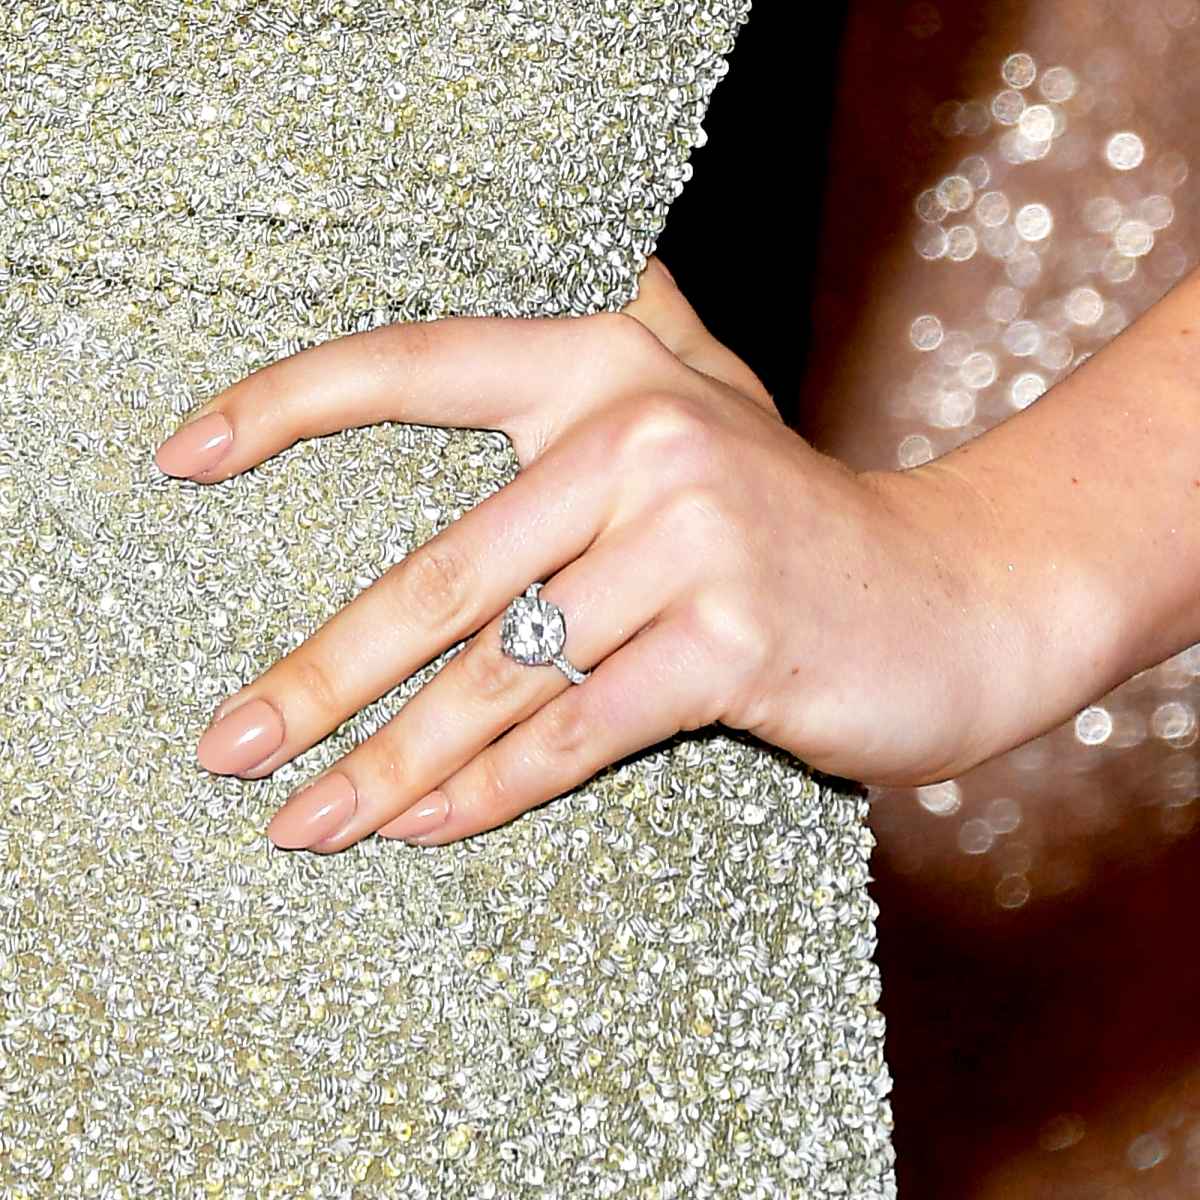 Kate Upton’s Engagement Ring Estimated to Be Worth $1.5 Million | UsWeekly